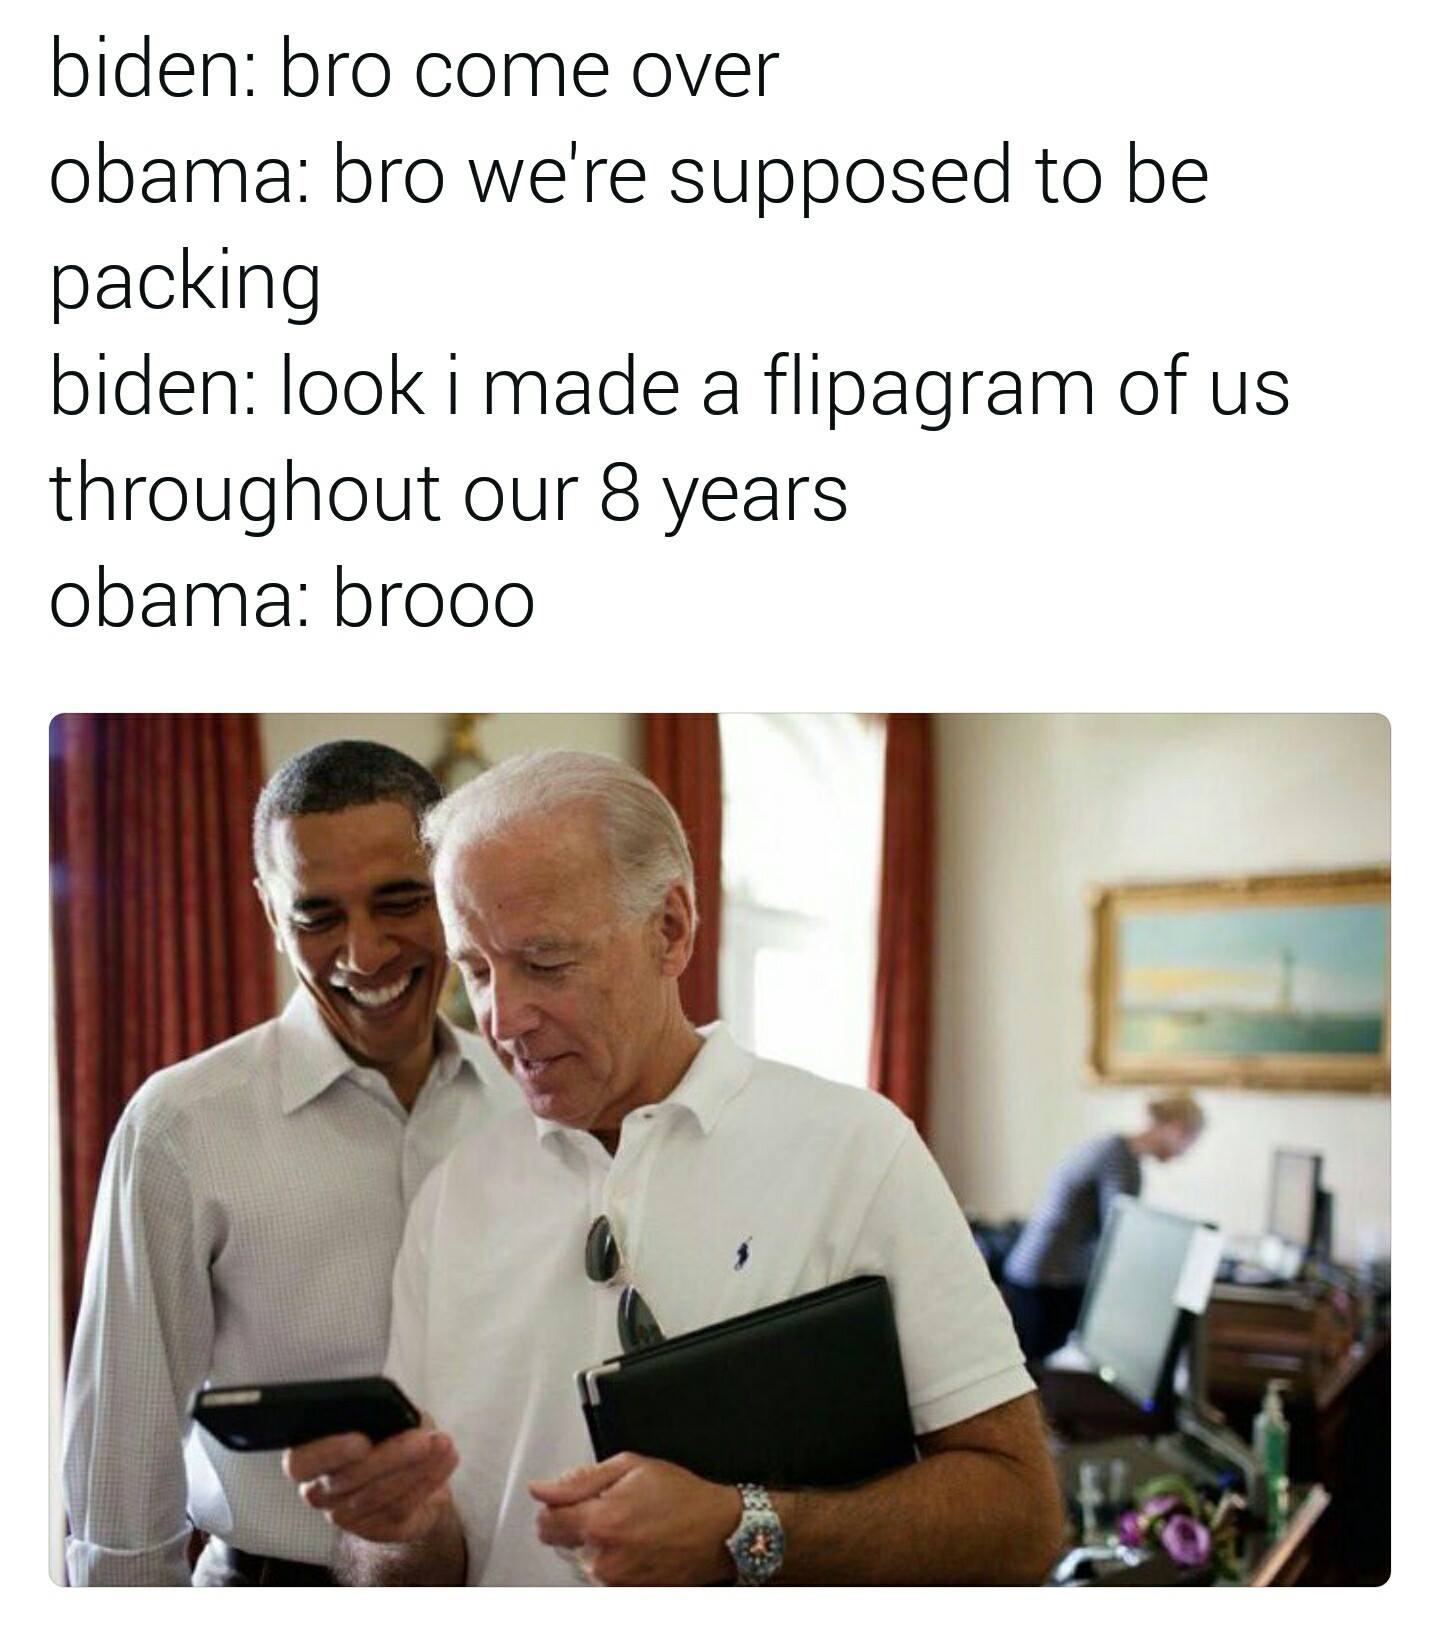 biden obama bromance memes - biden bro come over obama bro we're supposed to be packing biden look i made a flipagram of us throughout our 8 years obama brooo